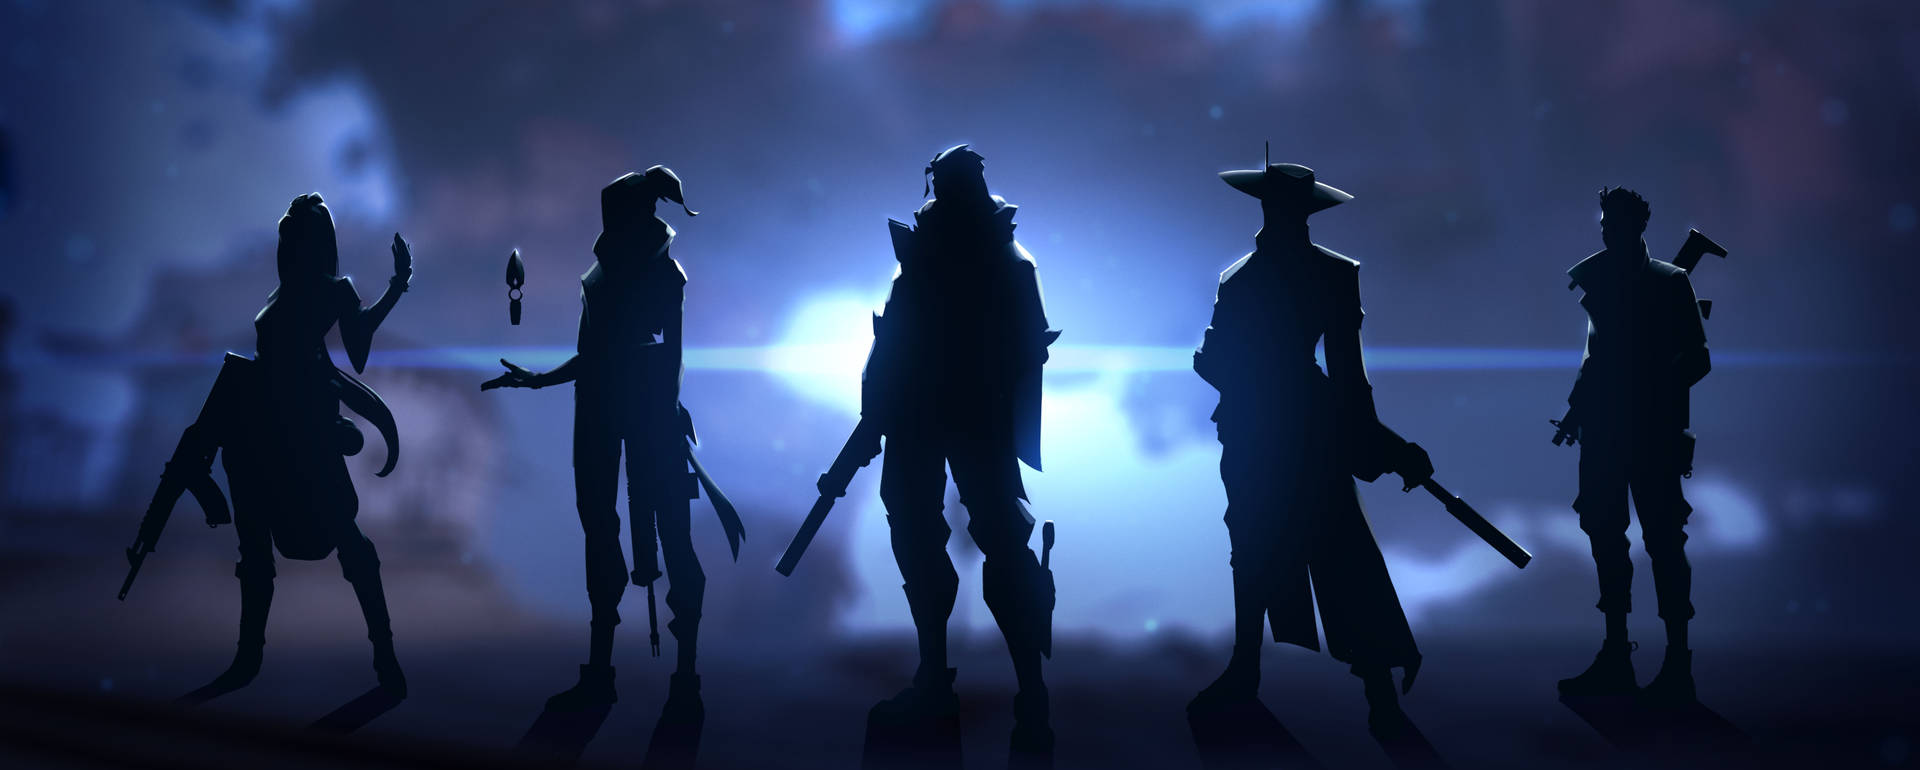 Agents’ Silhouttes Valorant 2k Background